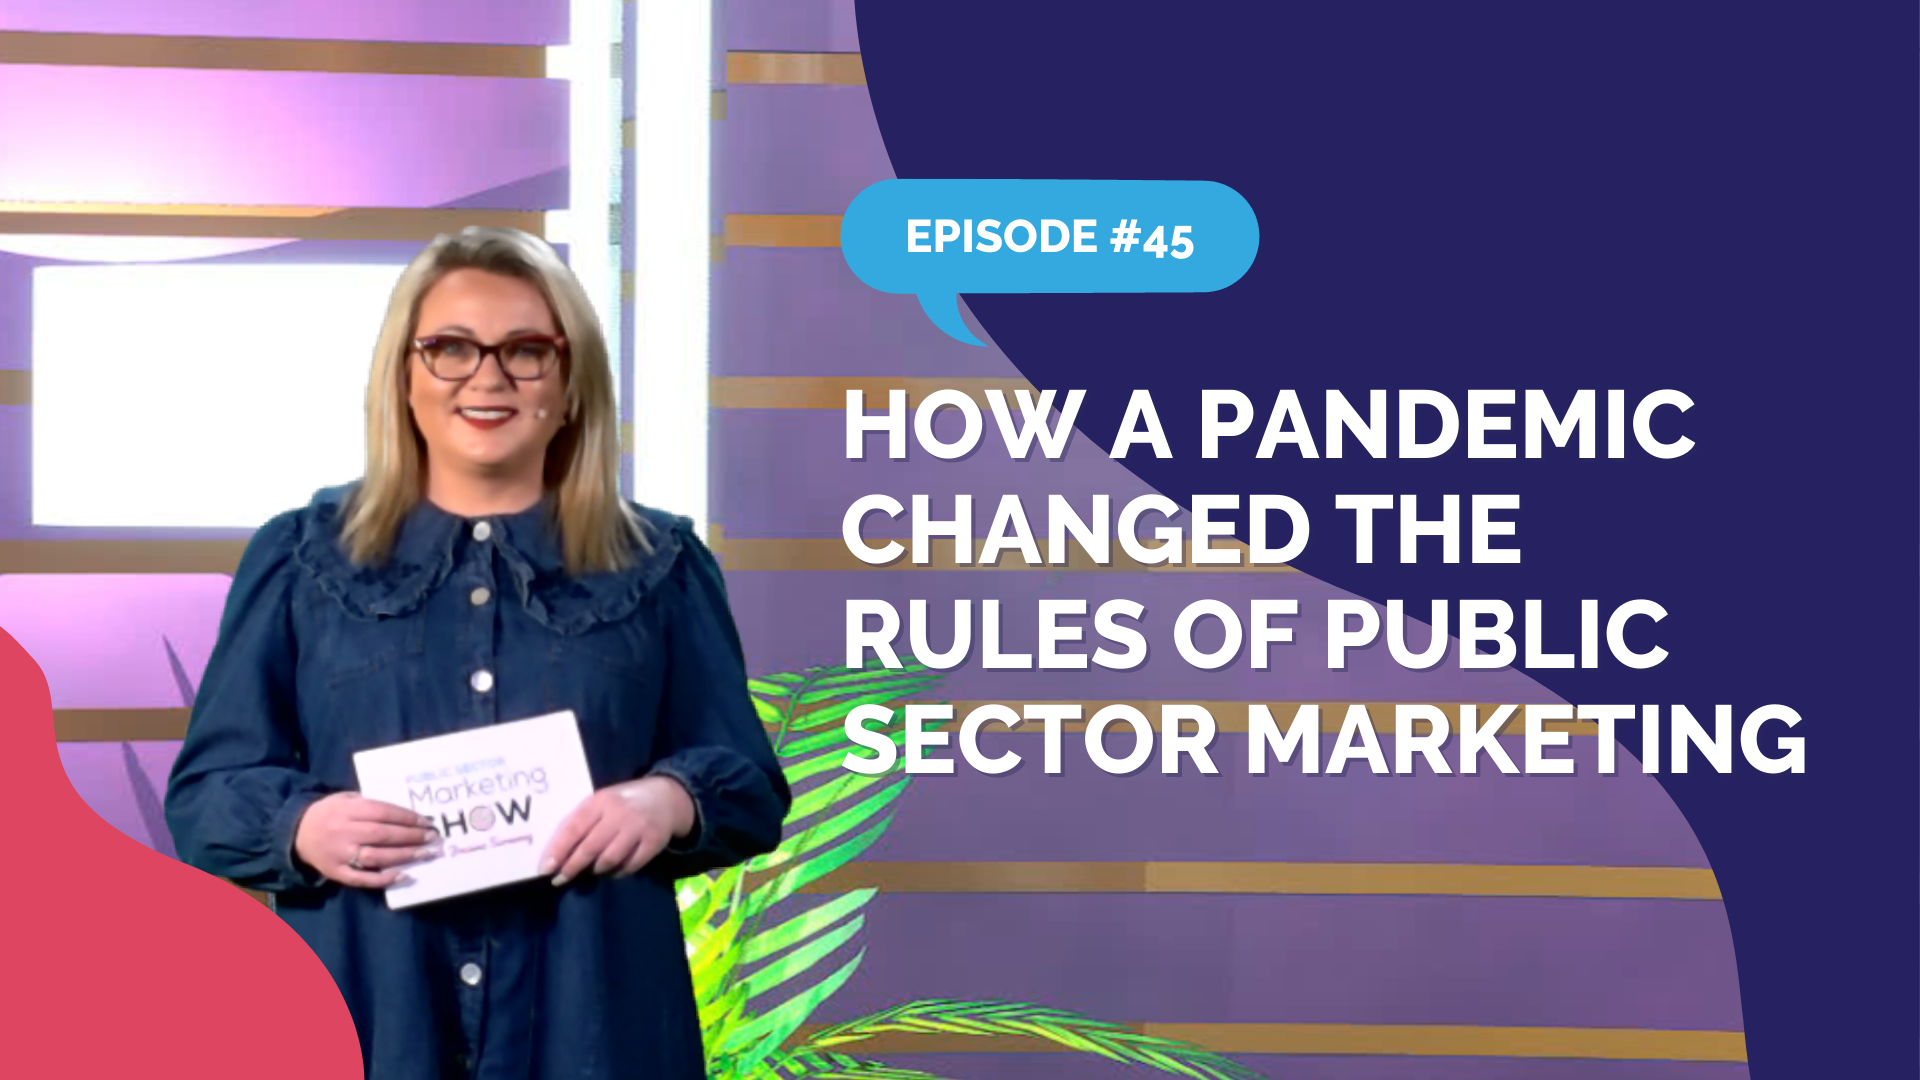 Episode 45 - How A Pandemic Changed The Rules of Public Sector Marketing